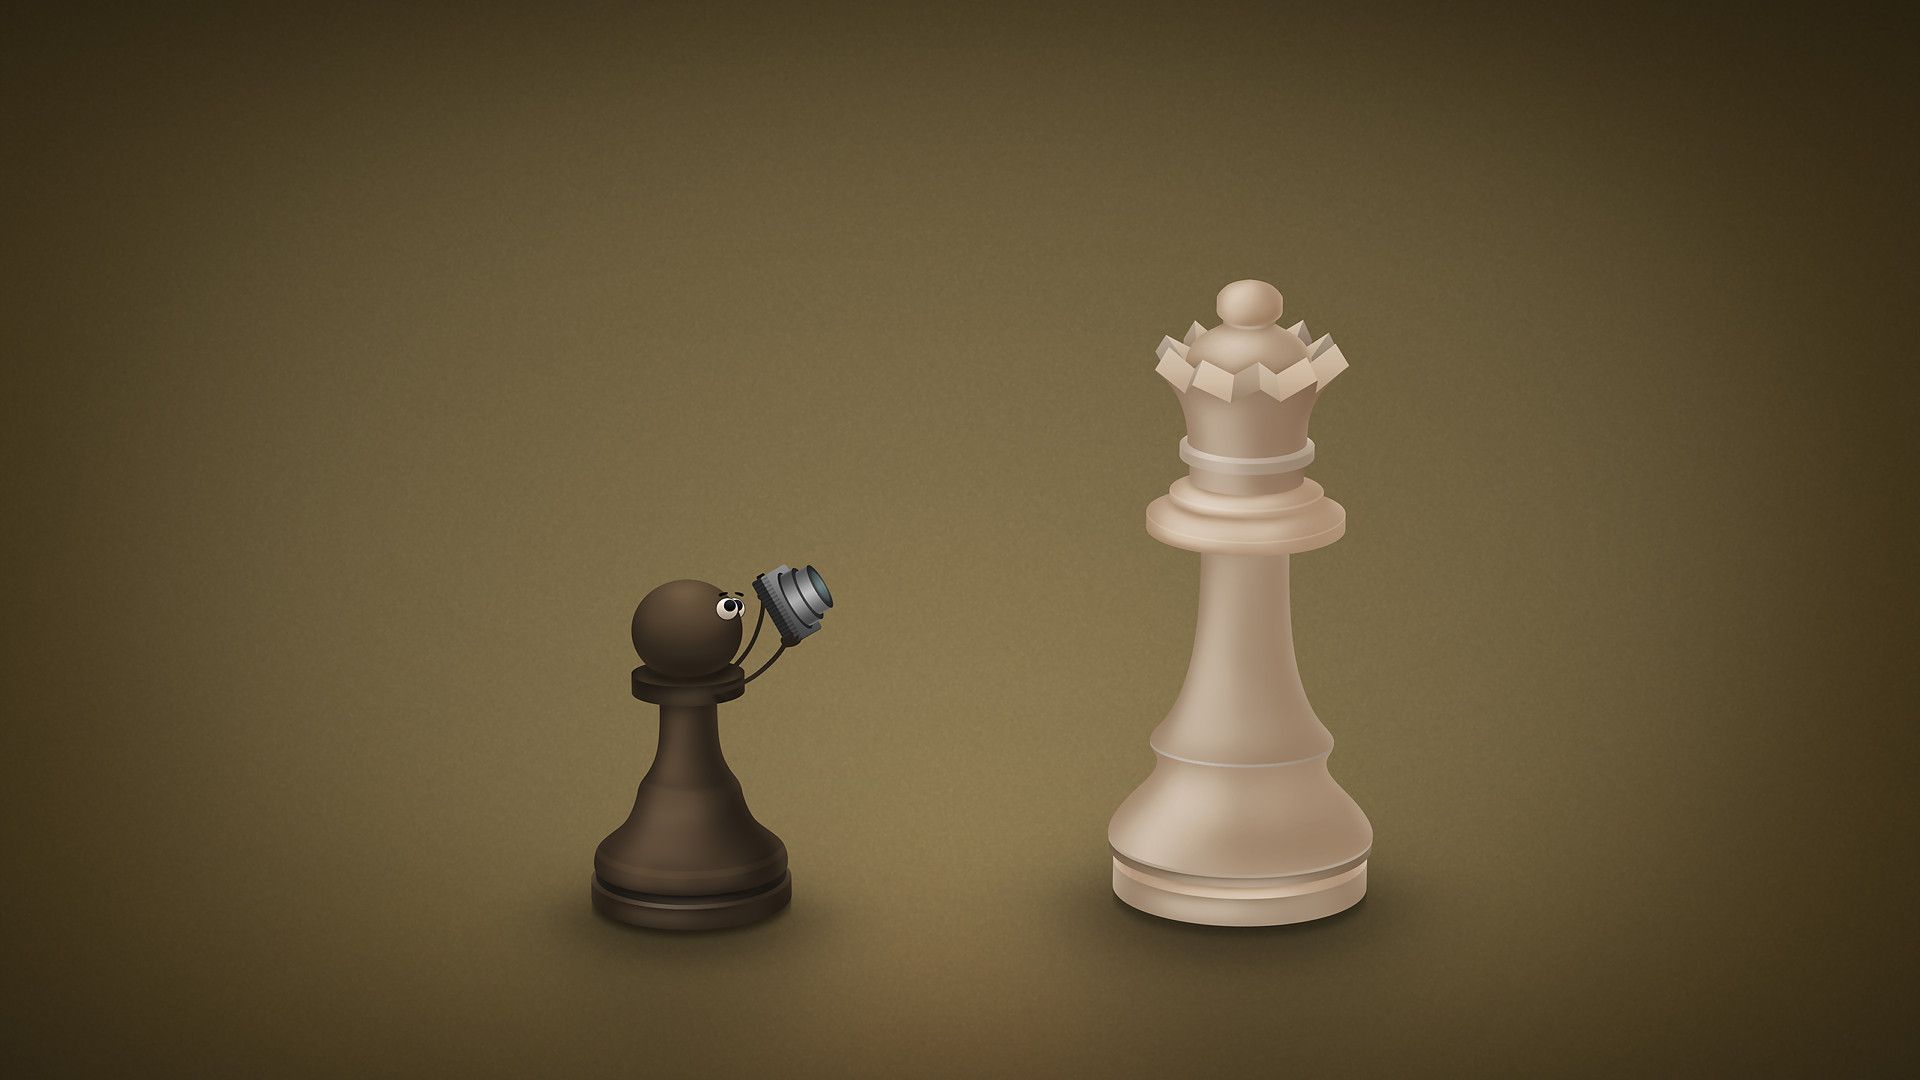 Download wallpaper 3840x2400 chess, pieces, game, games, party 4k ultra hd  16:10 hd background